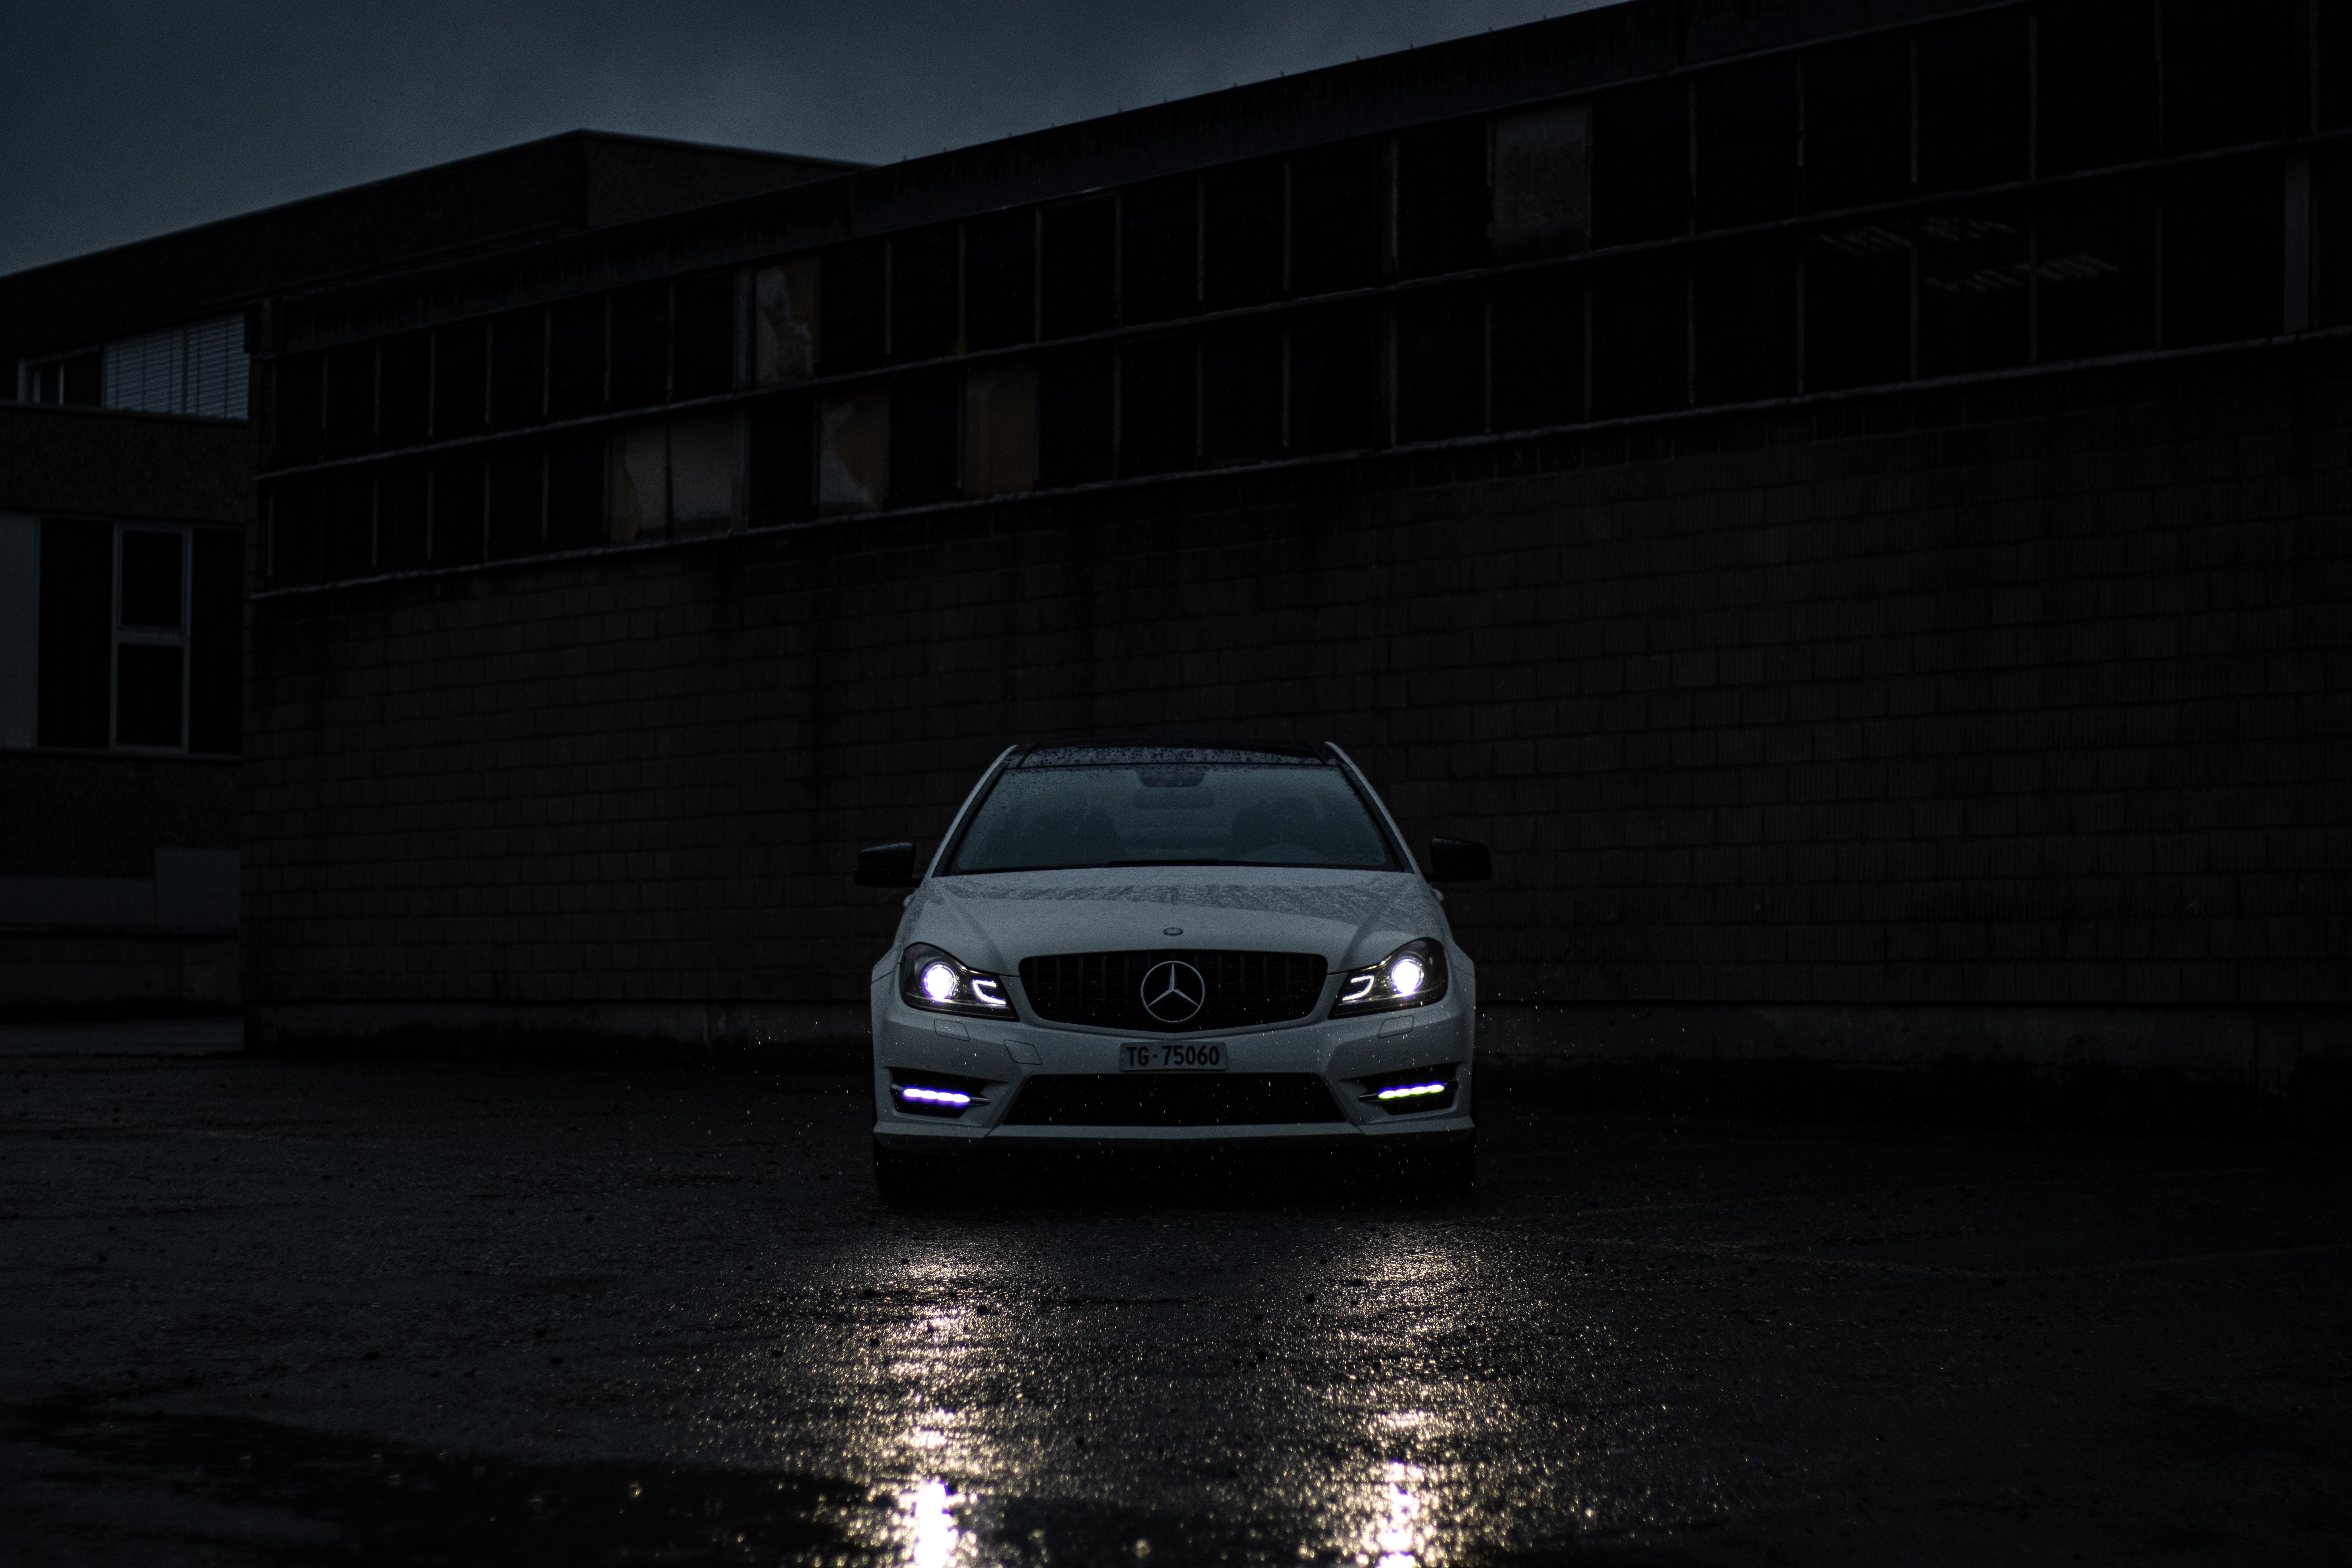 mercedes benz, headlights, cars, front view, white, lights, car